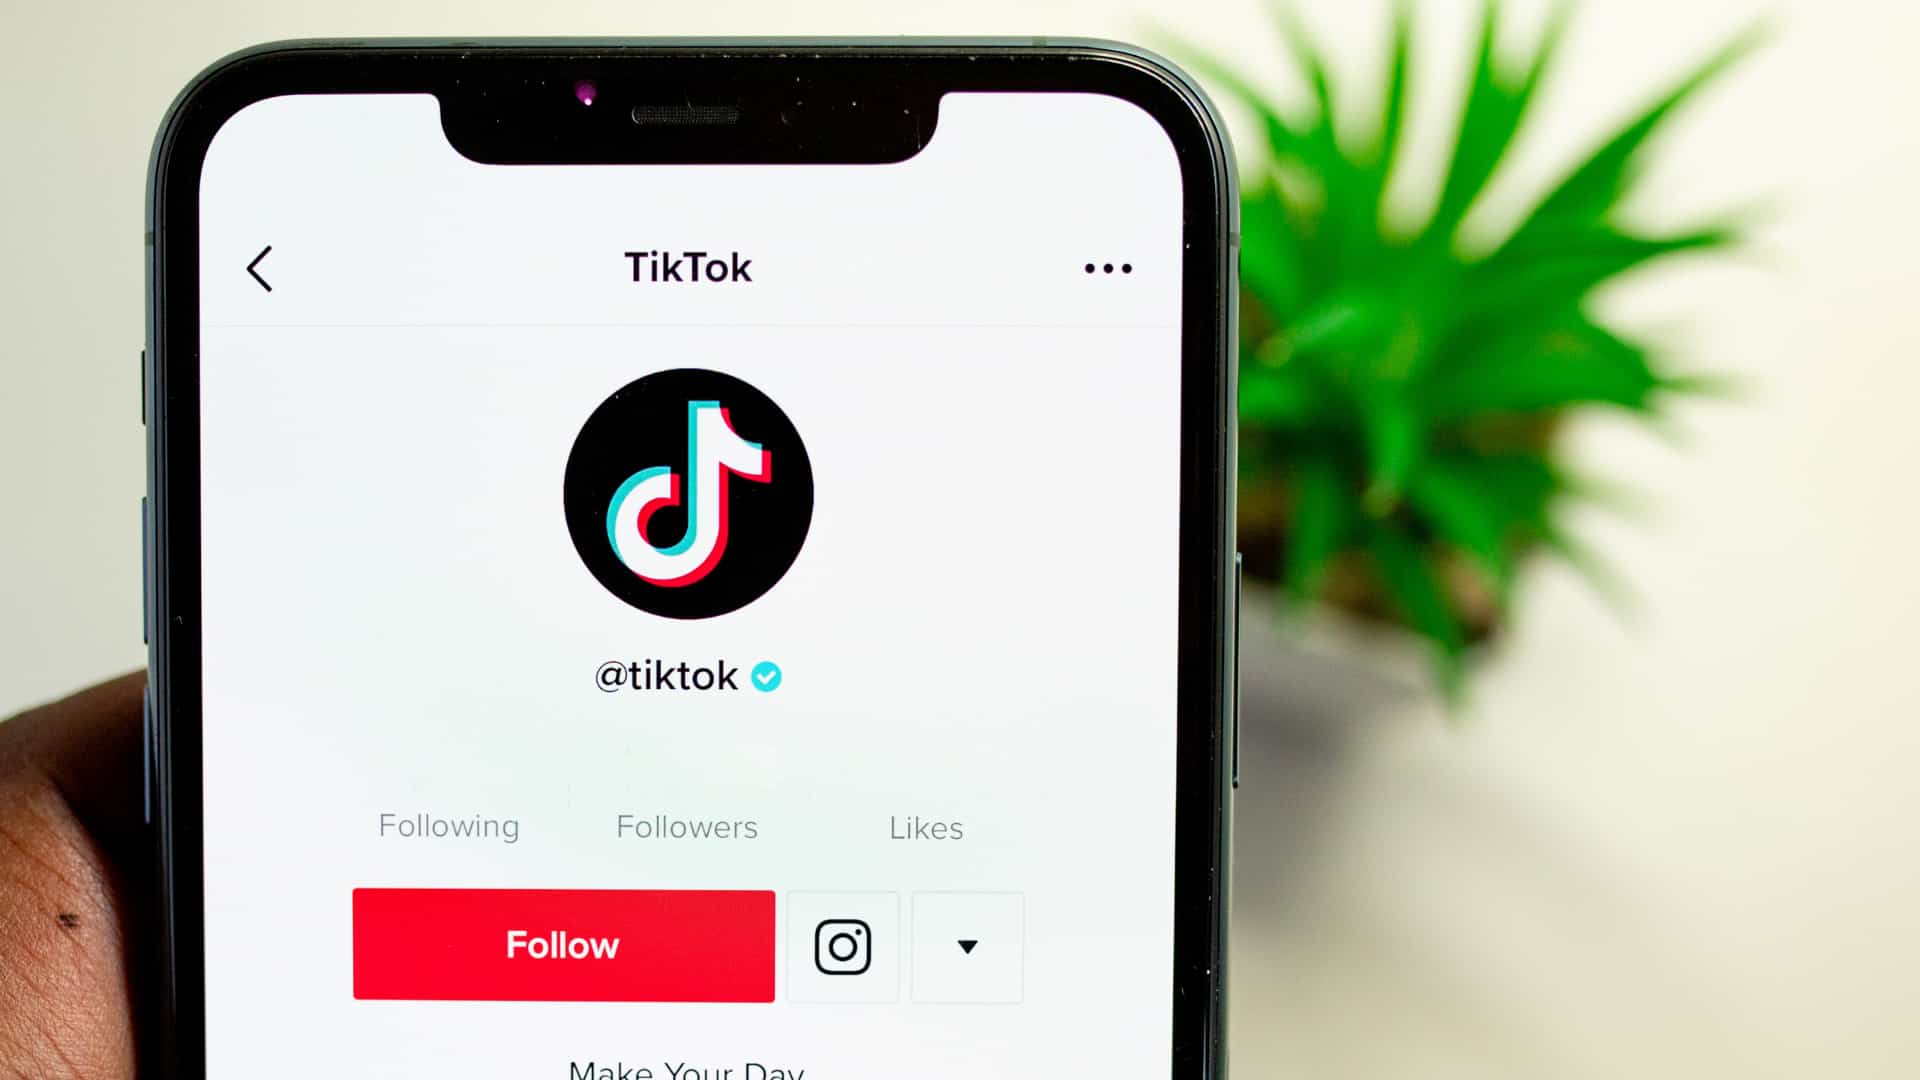 TikTok is the hottest and fastest growing social media platform for both users and marketers